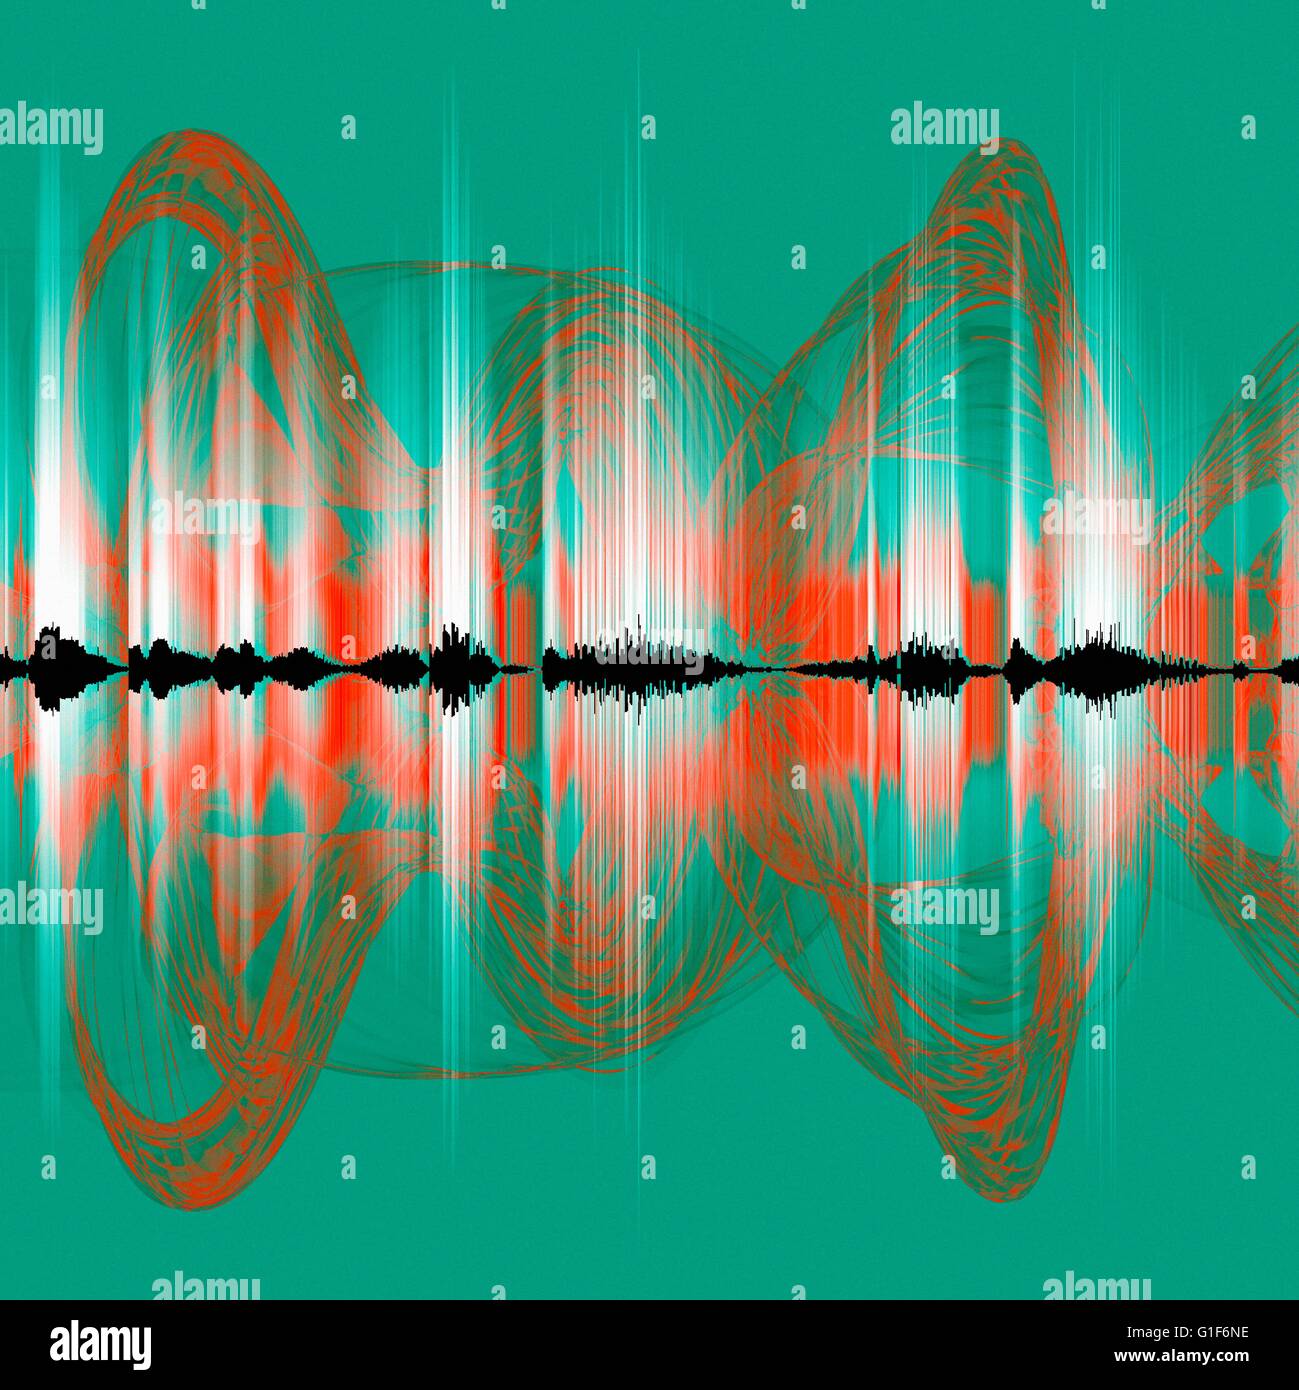 Abstract sound waves, illustration. Stock Photo